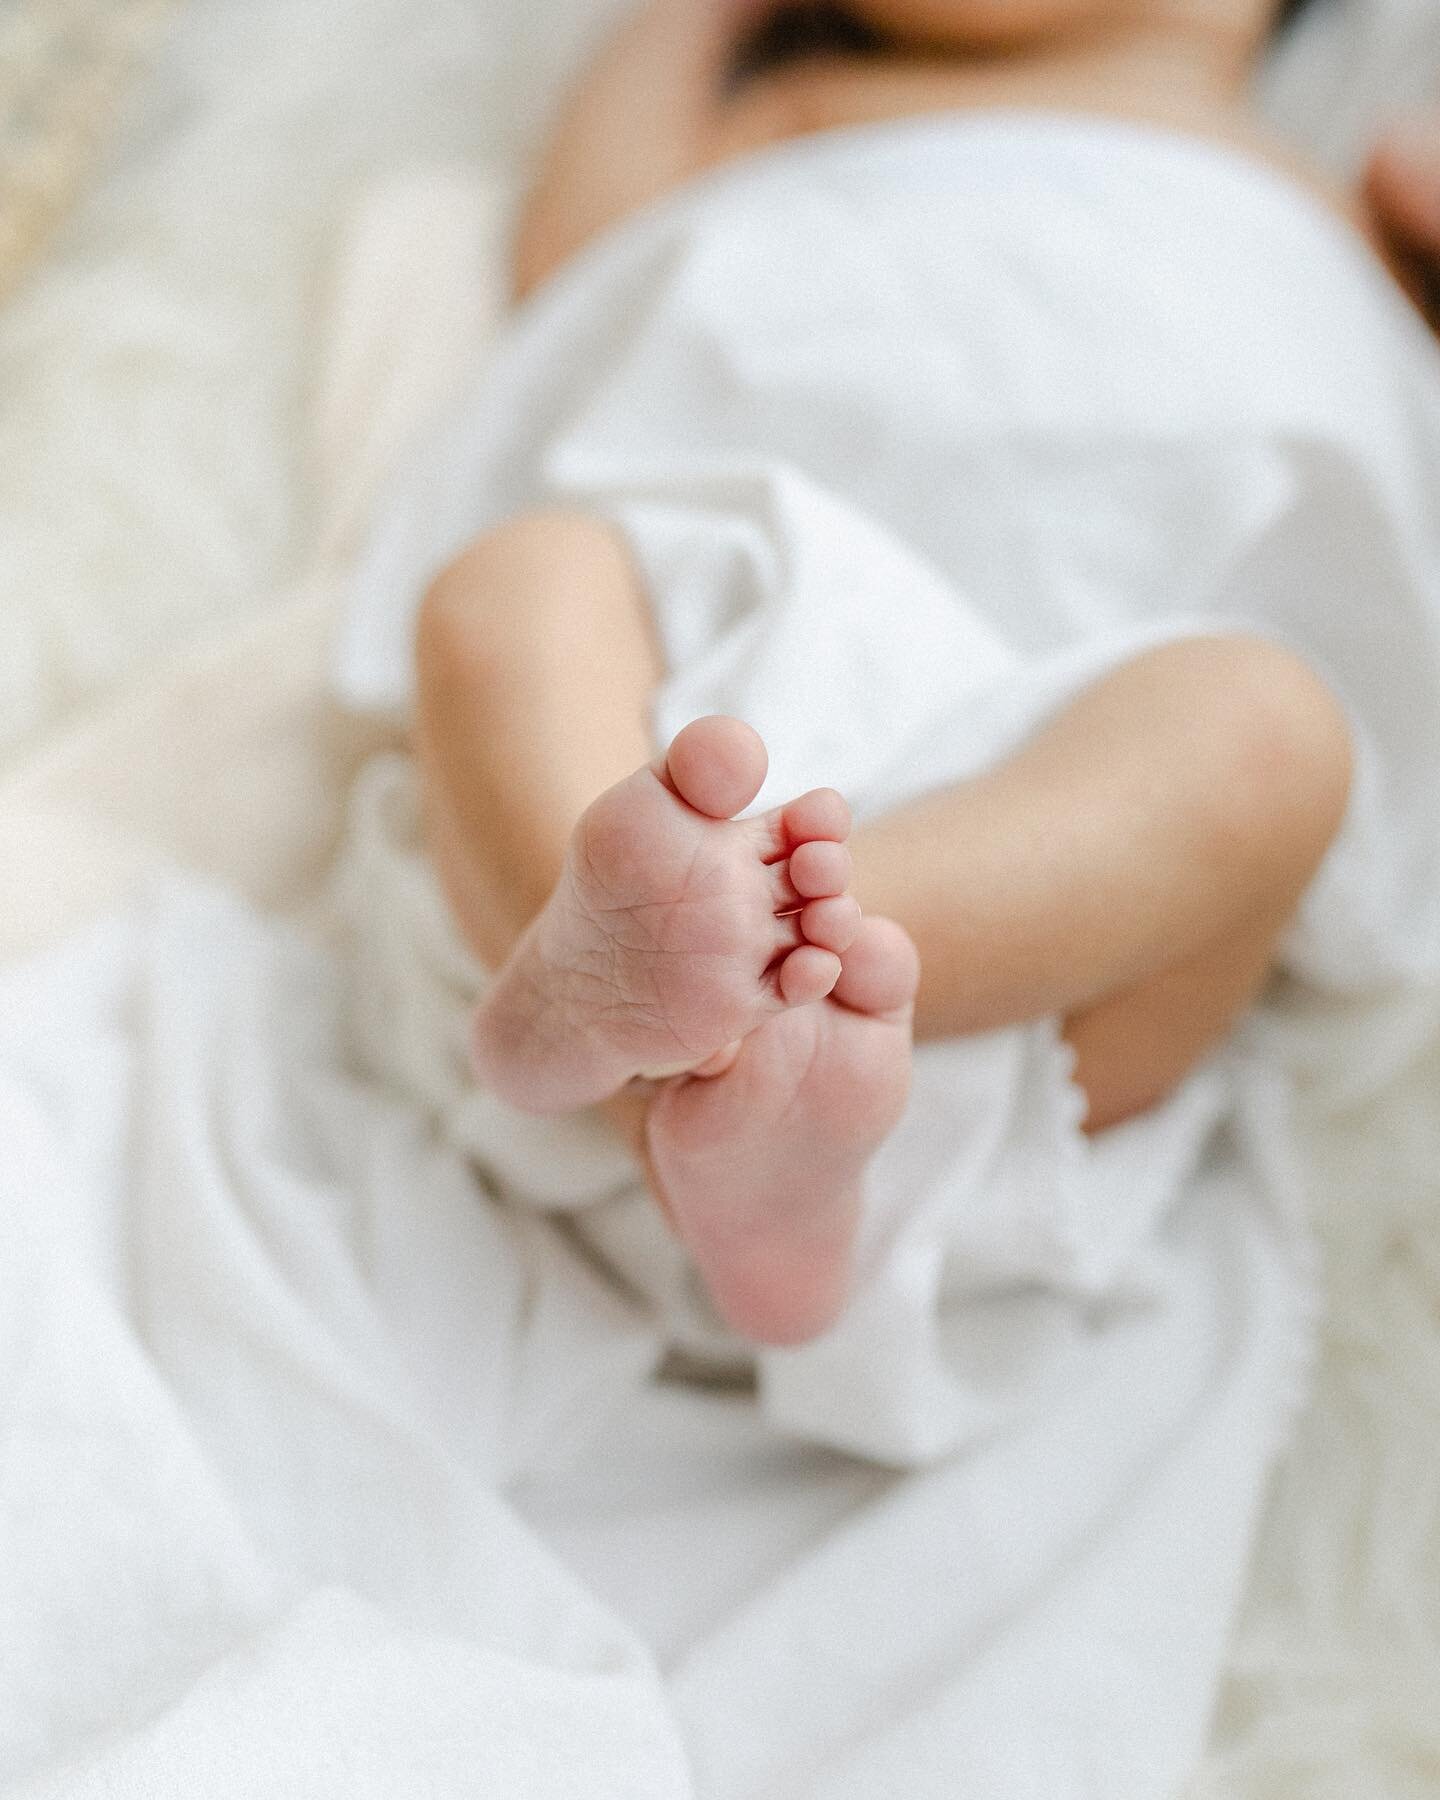 I&rsquo;ll never get enough of photos of baby feet!
What&rsquo;s your favorite detail shots of newborn? Mine definitely will be their tiny feet or the rolls(wrinkles?!) on their back. 😍

赤ちゃんの足の写真、何枚あっても何度見ても飽きません💕👣
ニューボーンのディテール写真で撮る、もしくは見るお気に入りのパ